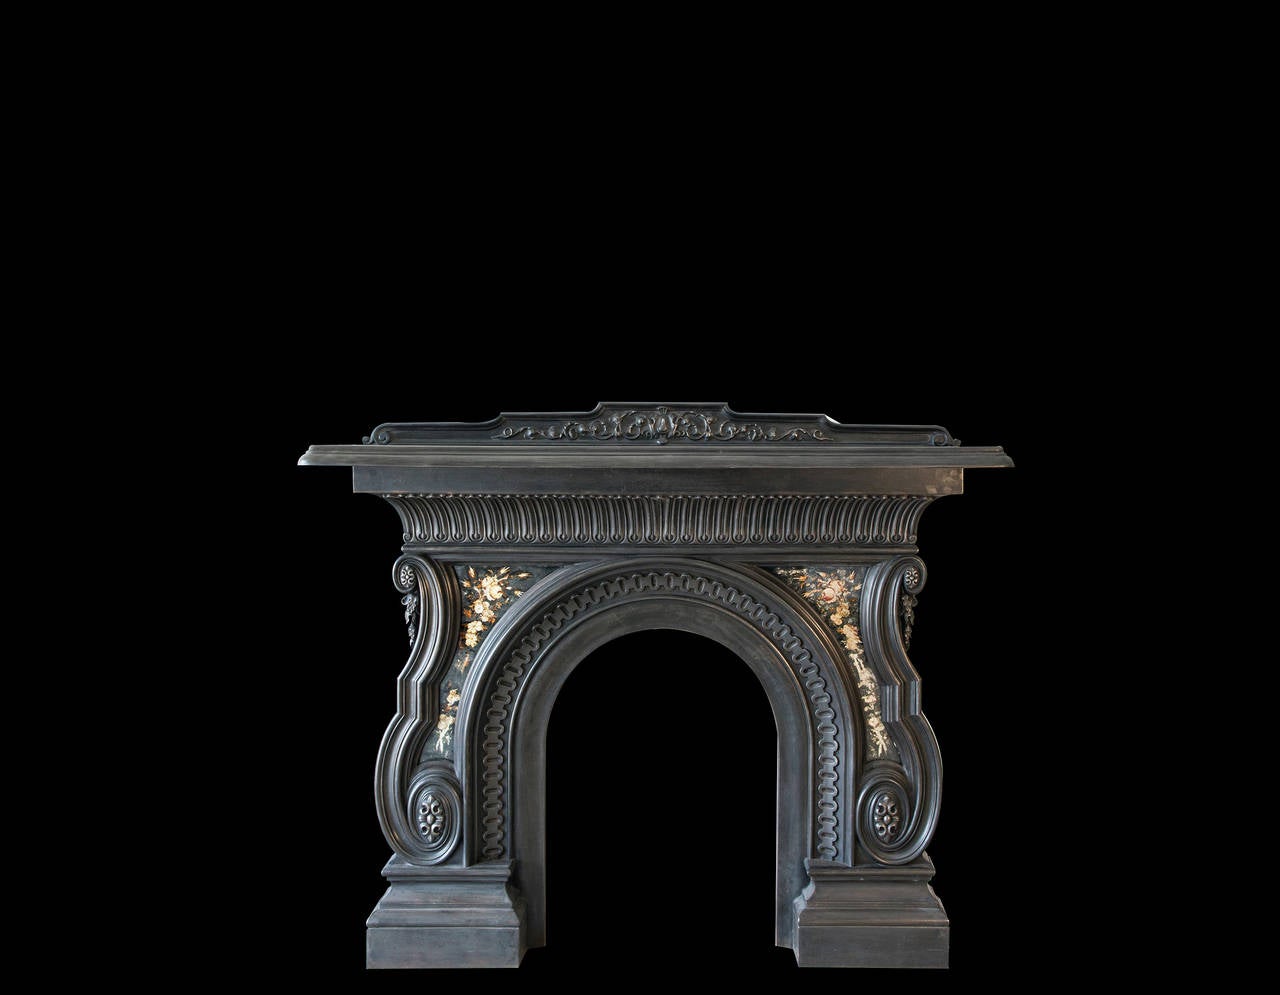 19th century cast iron Victorian mantel and grate with gold foliate detailing.

Opening dimensions: 21" W x 28 1/4" H.